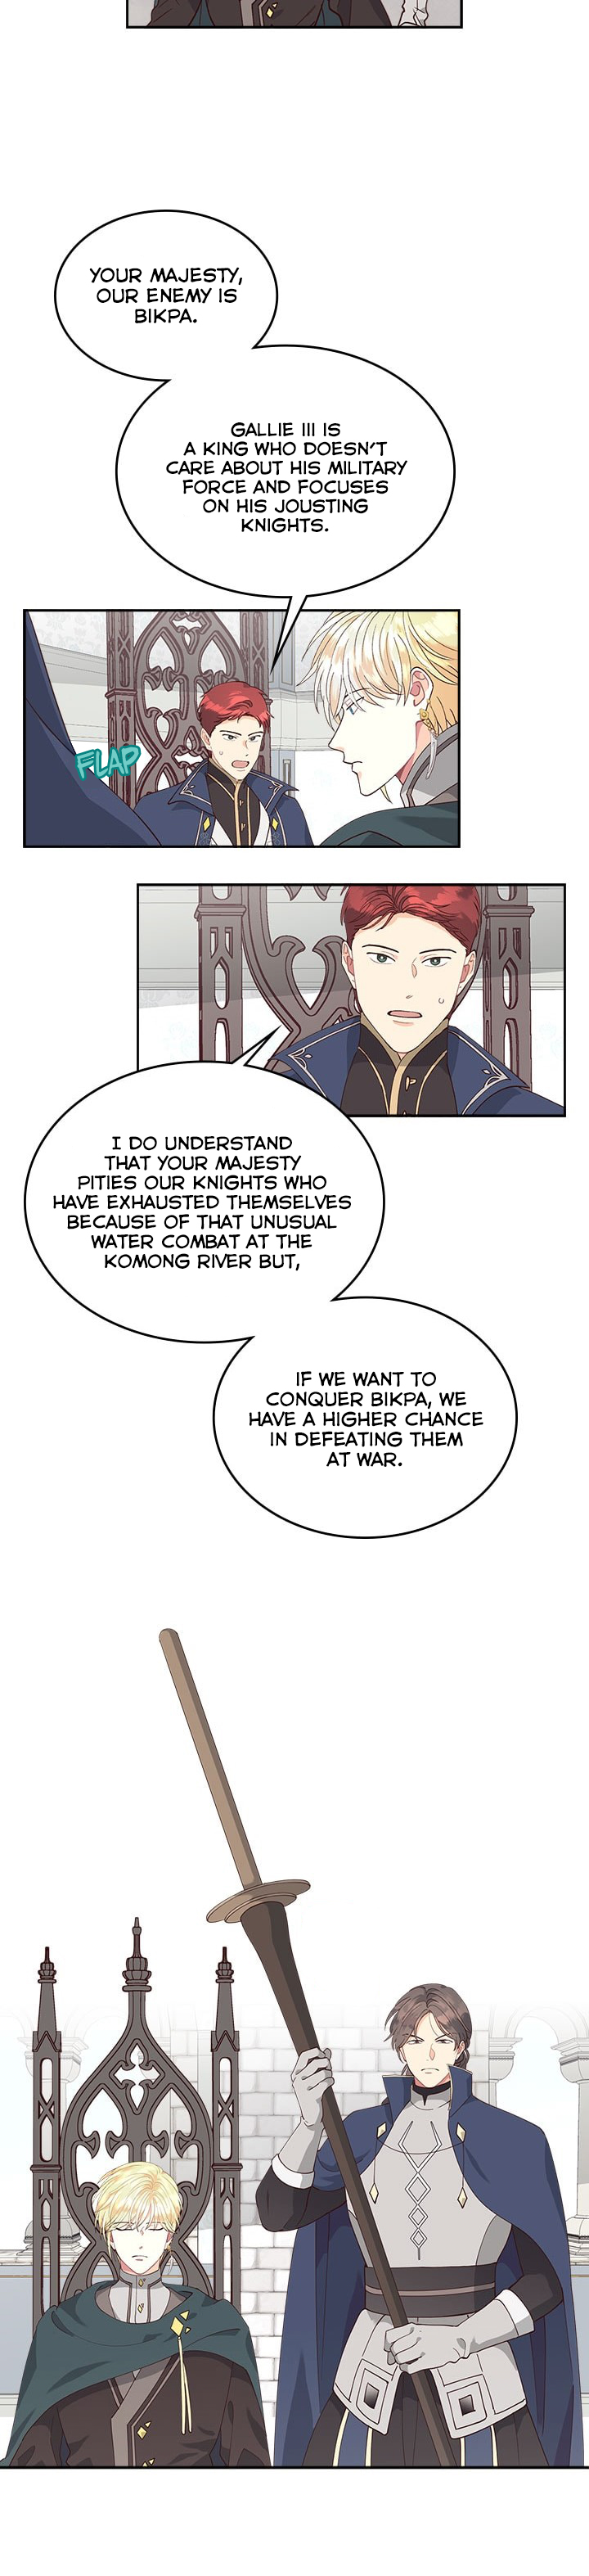 Emperor And The Female Knight chapter 24